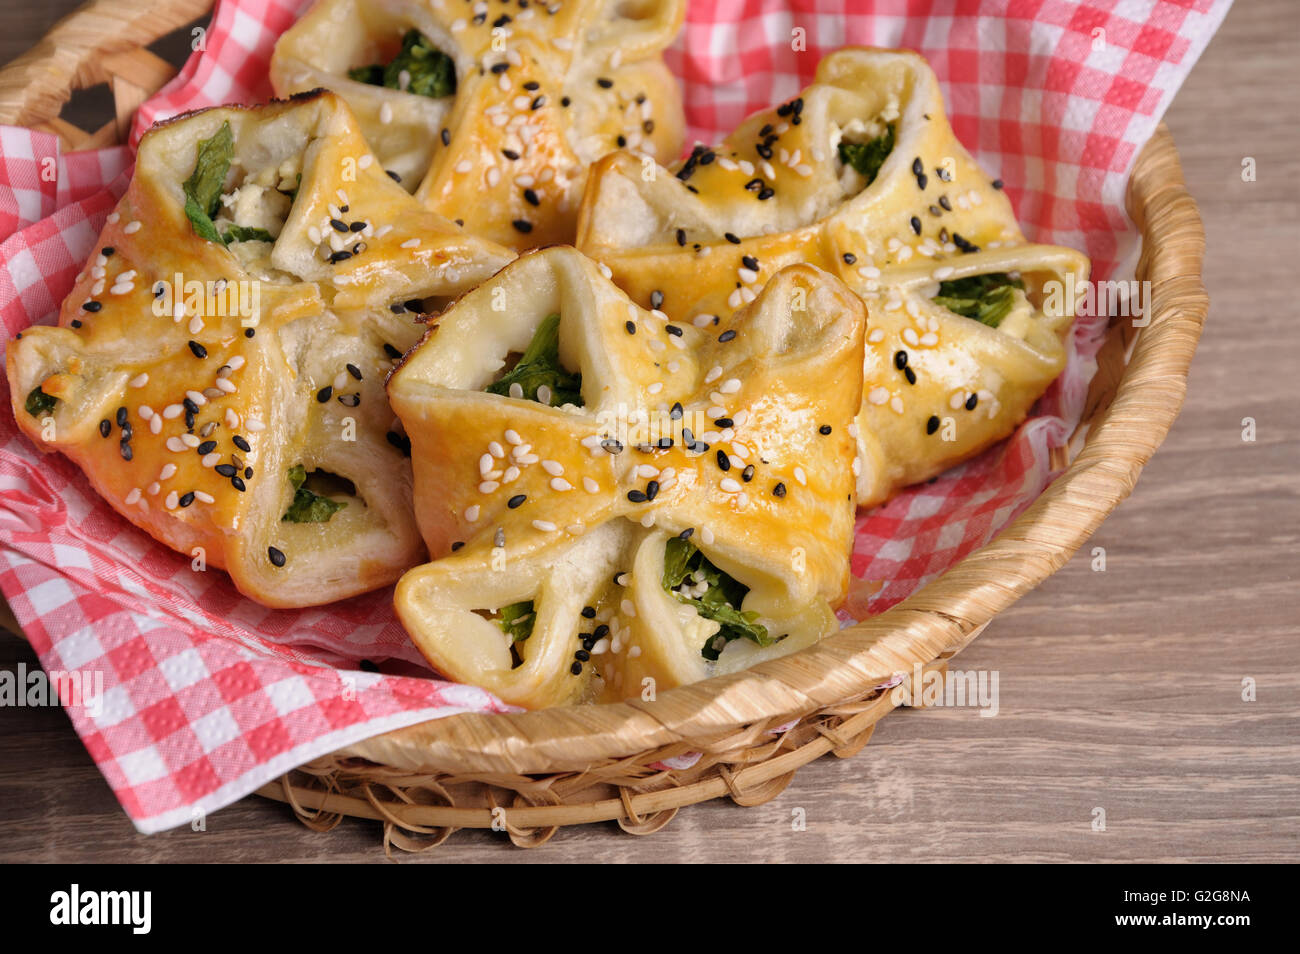 puff pastry with spinach and ricotta in a basket on table Stock Photo